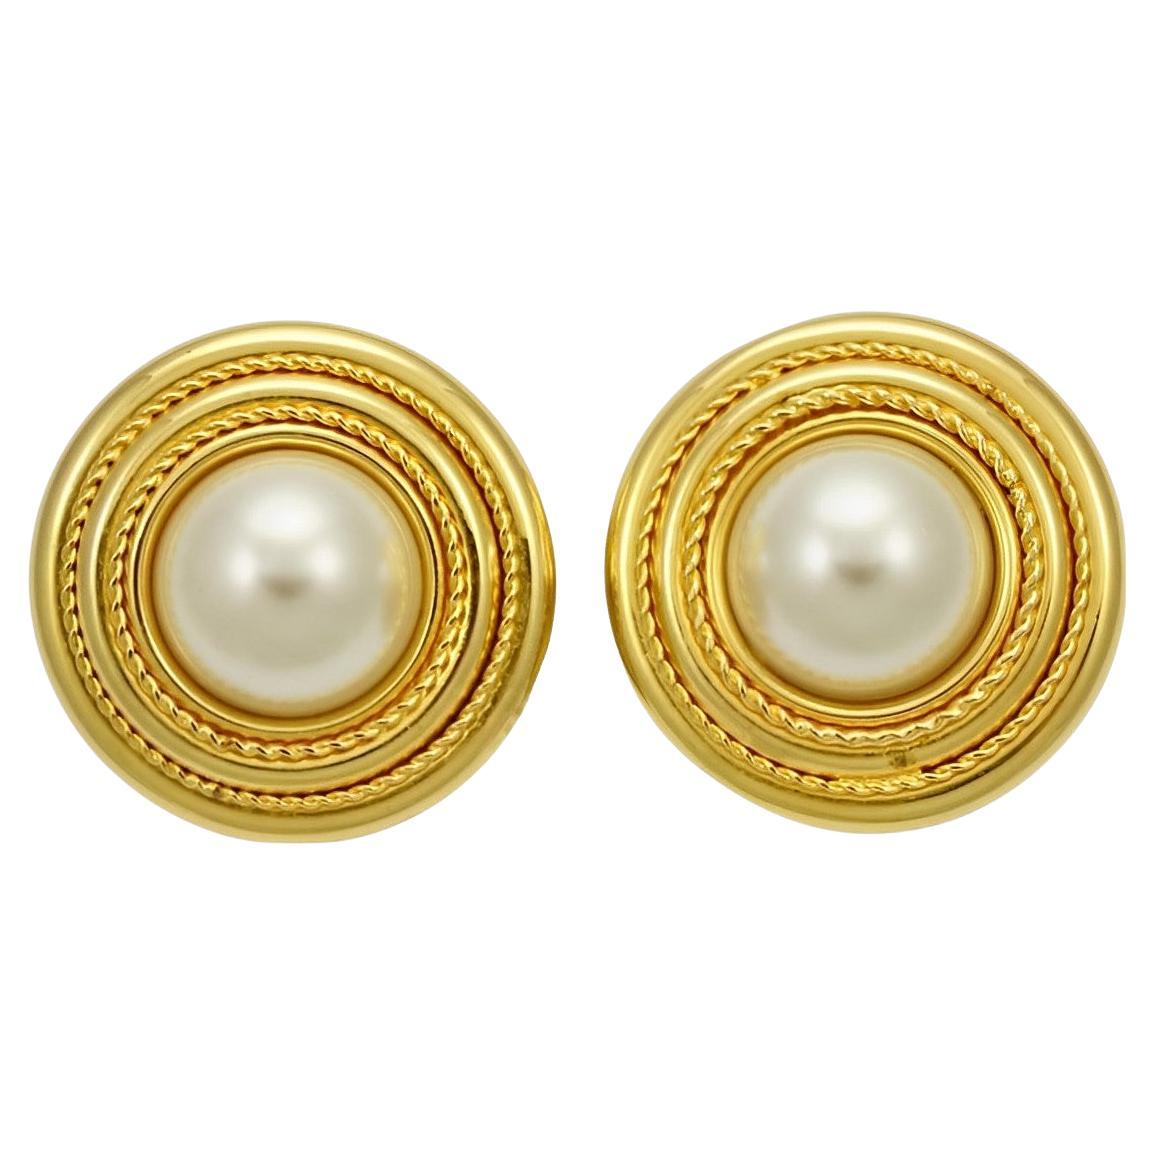 Bozart Gold Plated and Faux Pearl Clip On Statement Earrings Made in Italy For Sale